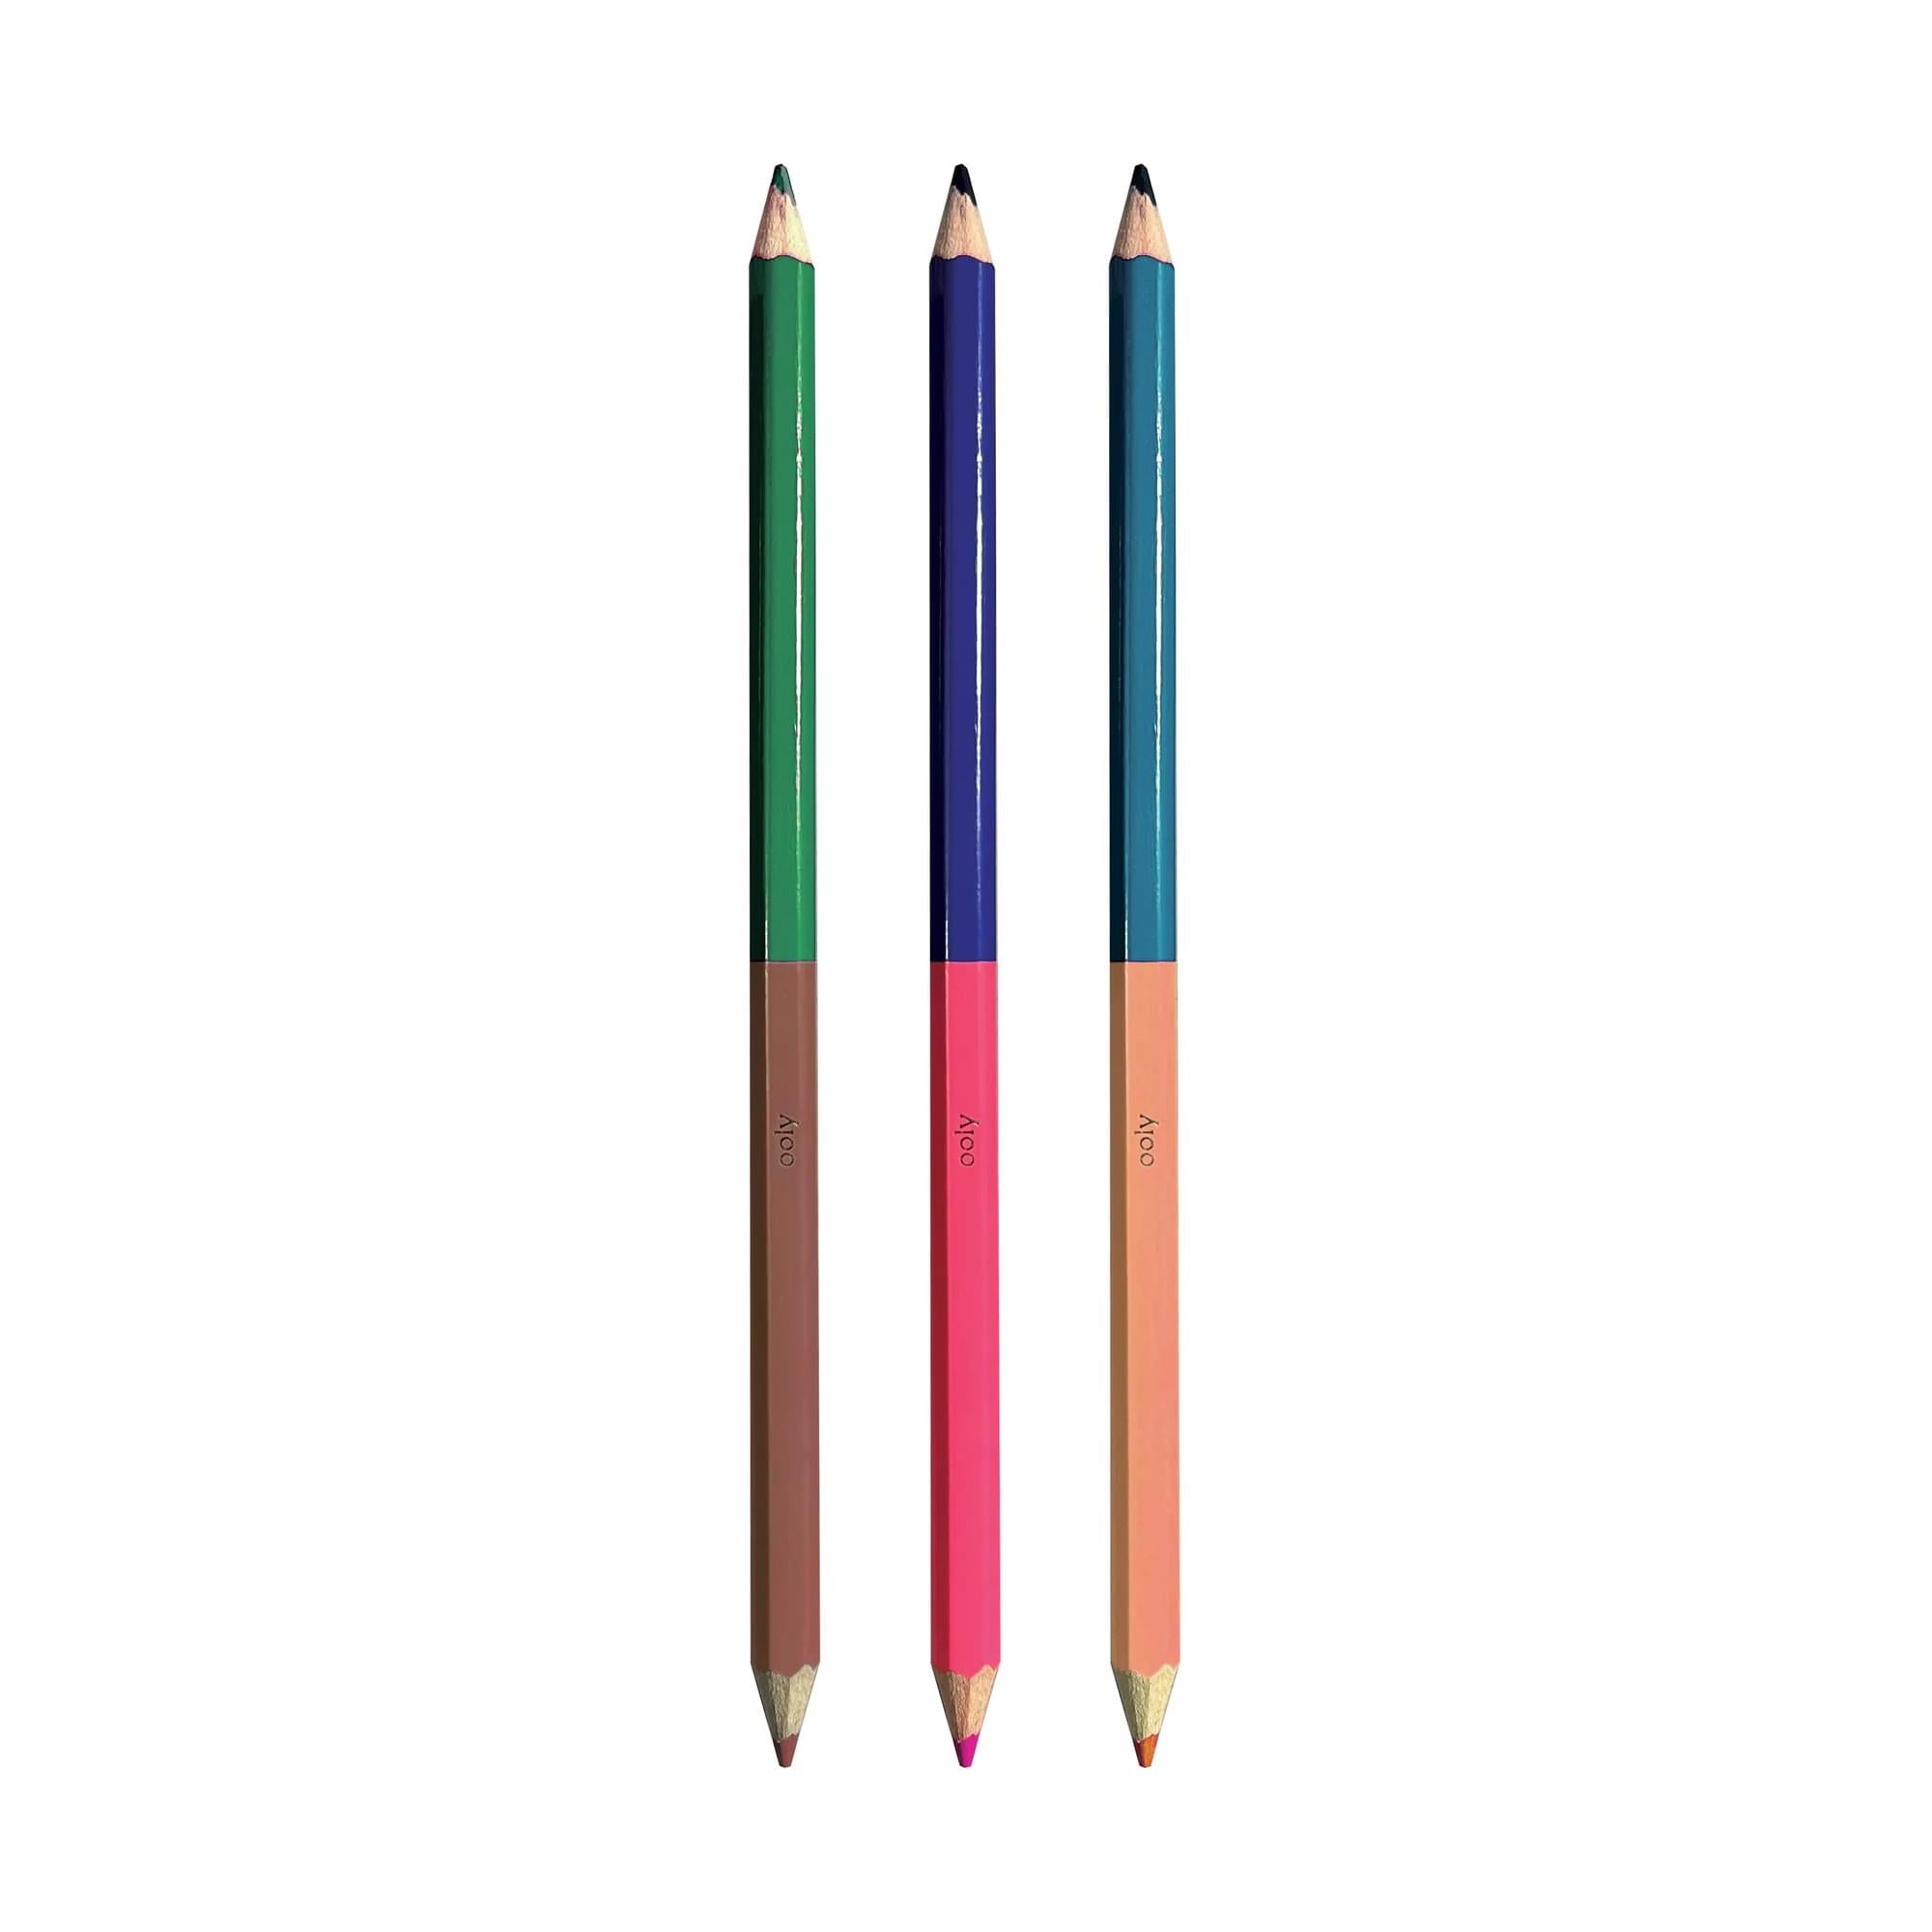  24 Pieces Coastal Colors Pencils for Kids Cute Pencils  Erasable Colored Pencils Wood Colored Pencils with Eraser Blue Wooden  Pencils for School Office : Office Products